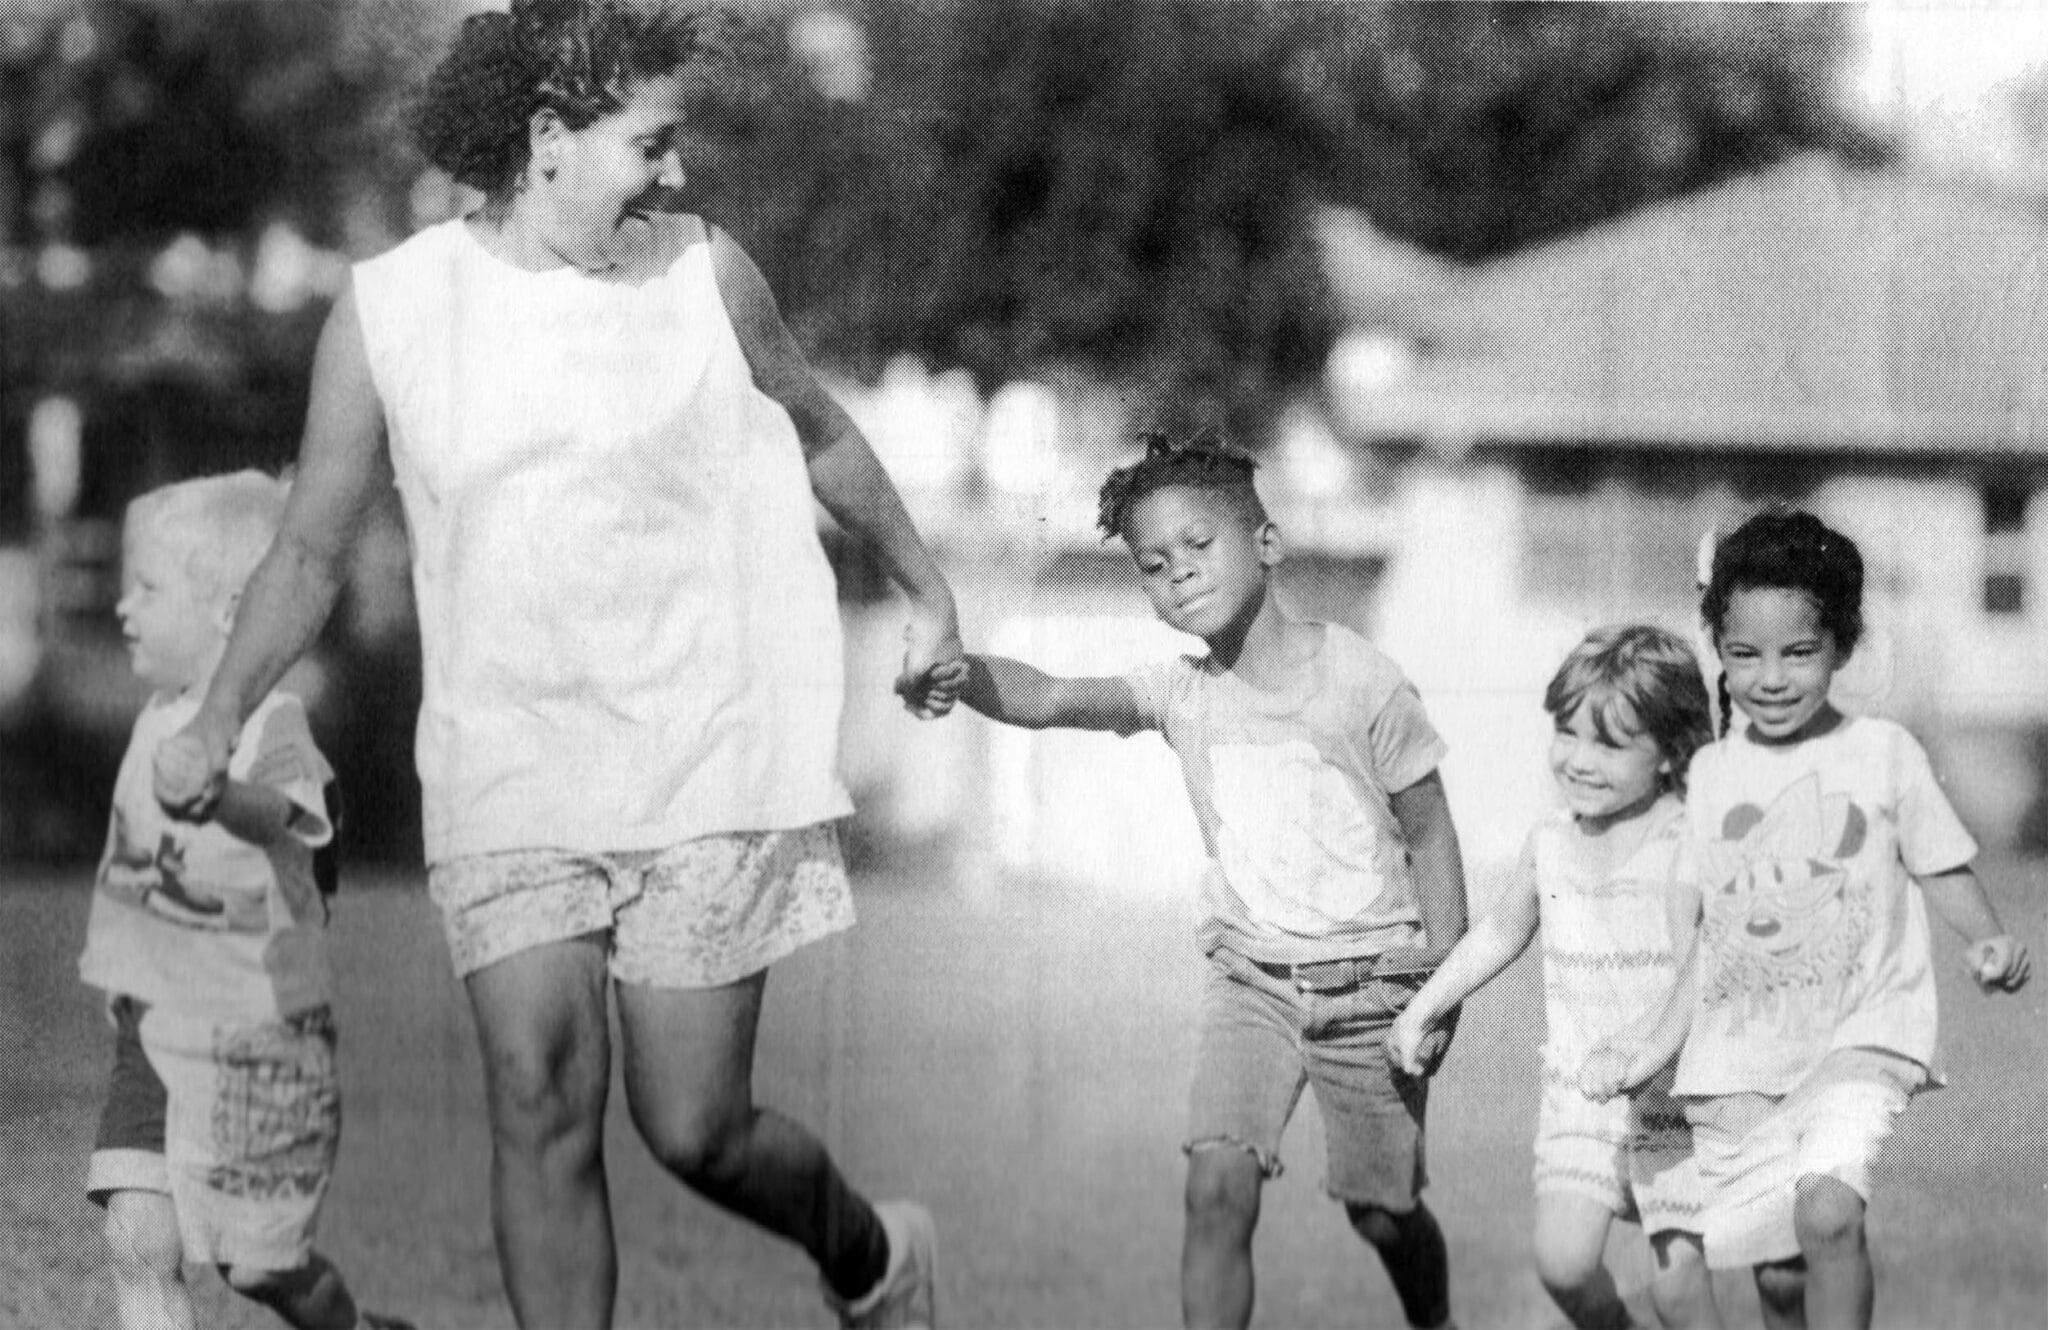 Anne running with two children_B&W Cropped